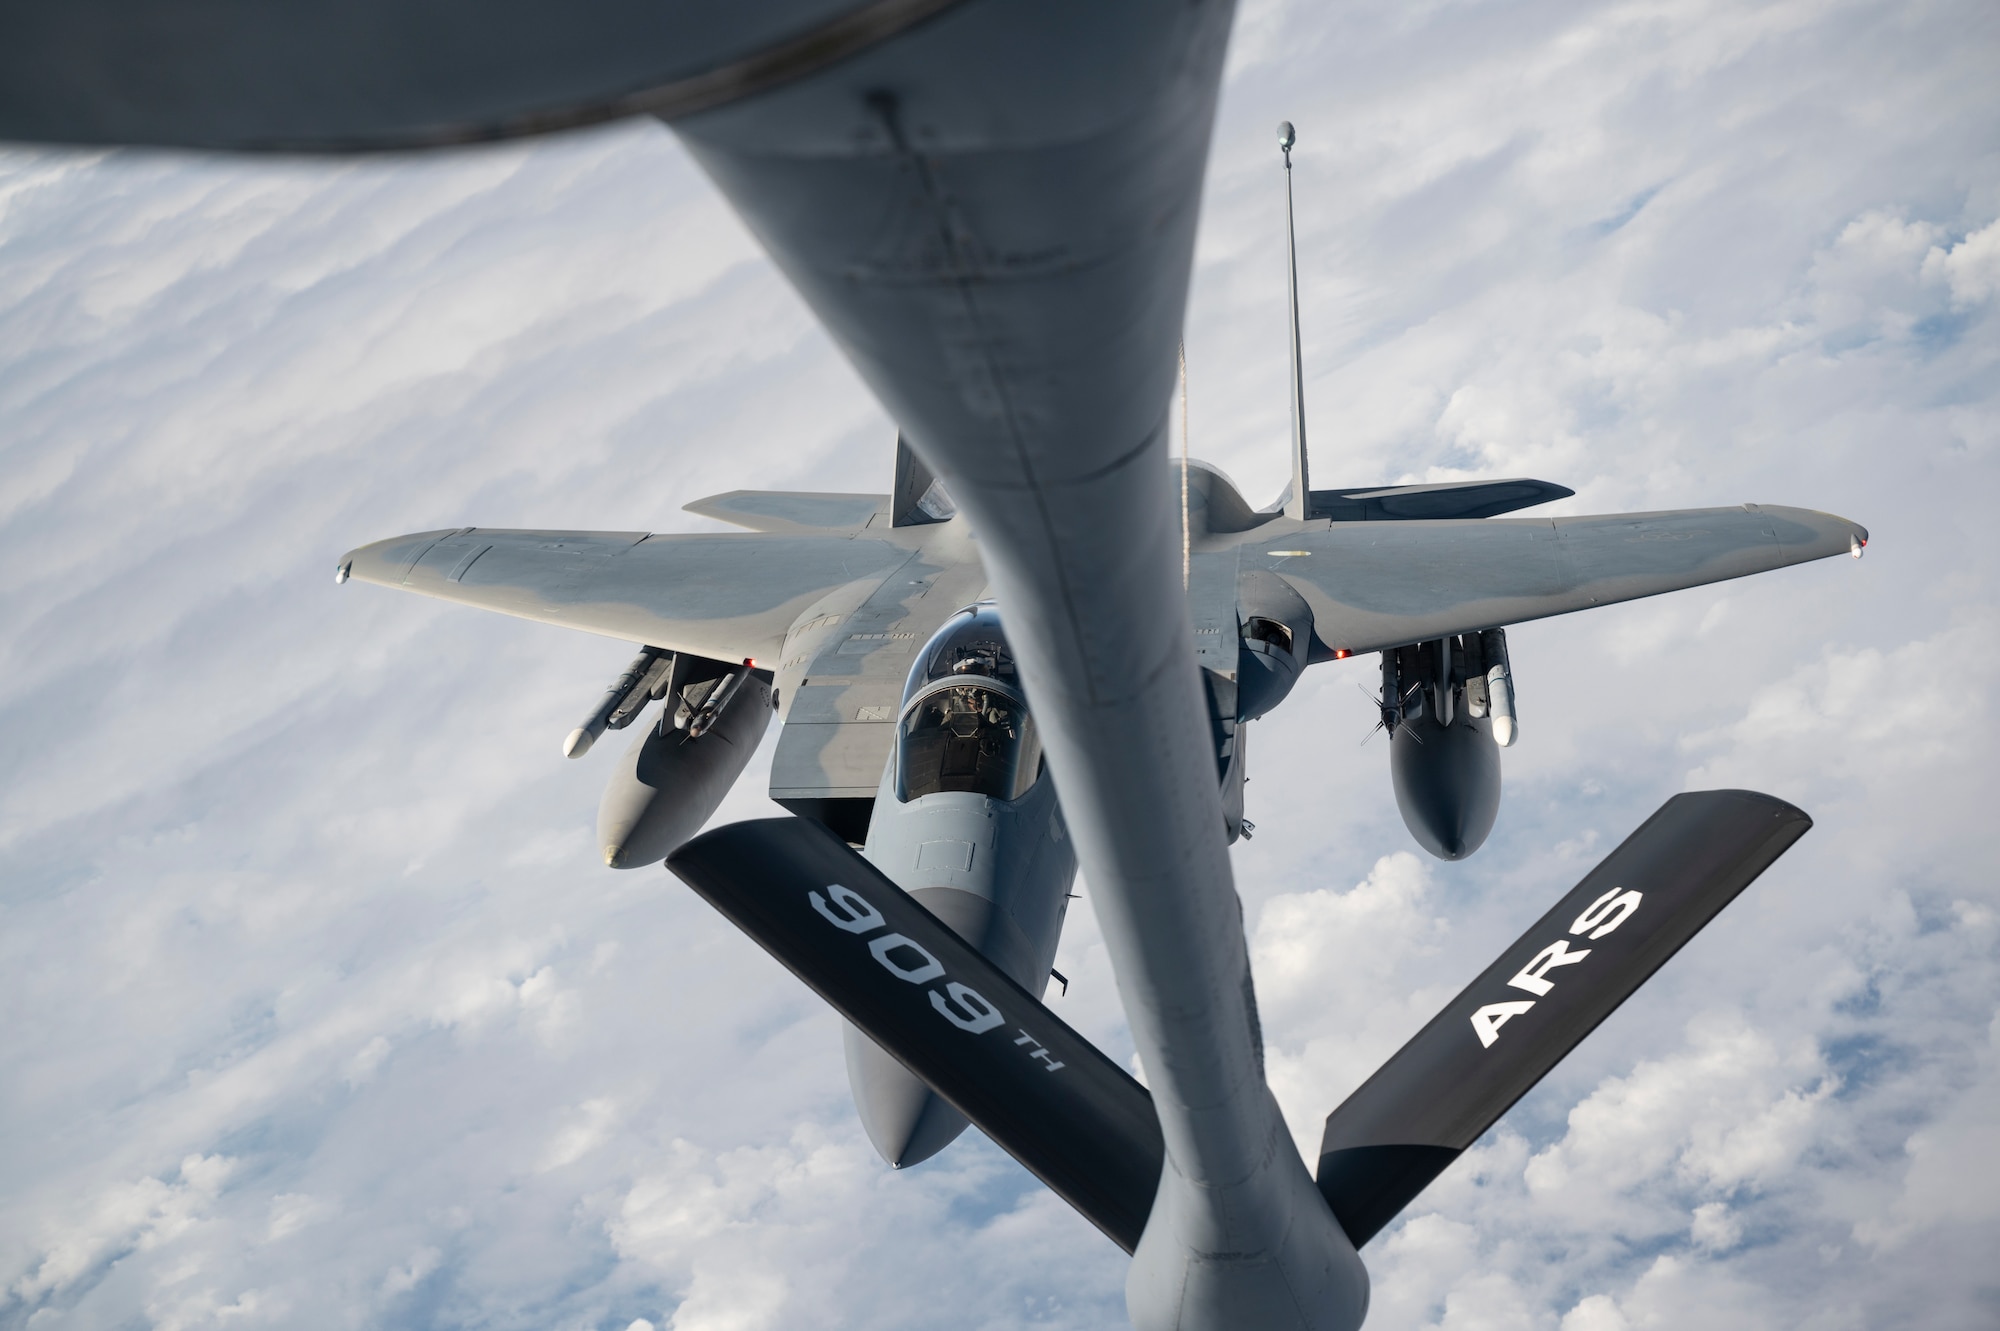 A 44th Fighter Squadron F-15C Eagle approaches a 909th Air Refueling Squadron KC-135 Stratotanker to receive aerial refueling during a flight over the Pacific Ocean in support of exercise Keen Sword 23, Nov. 17, 2022. Bilateral exercises allow U.S. military and Japan Self-Defense Forces to work together across a variety of areas to enhance interoperability and readiness. (U.S. Air Force photo by Senior Airman Jessi Roth)